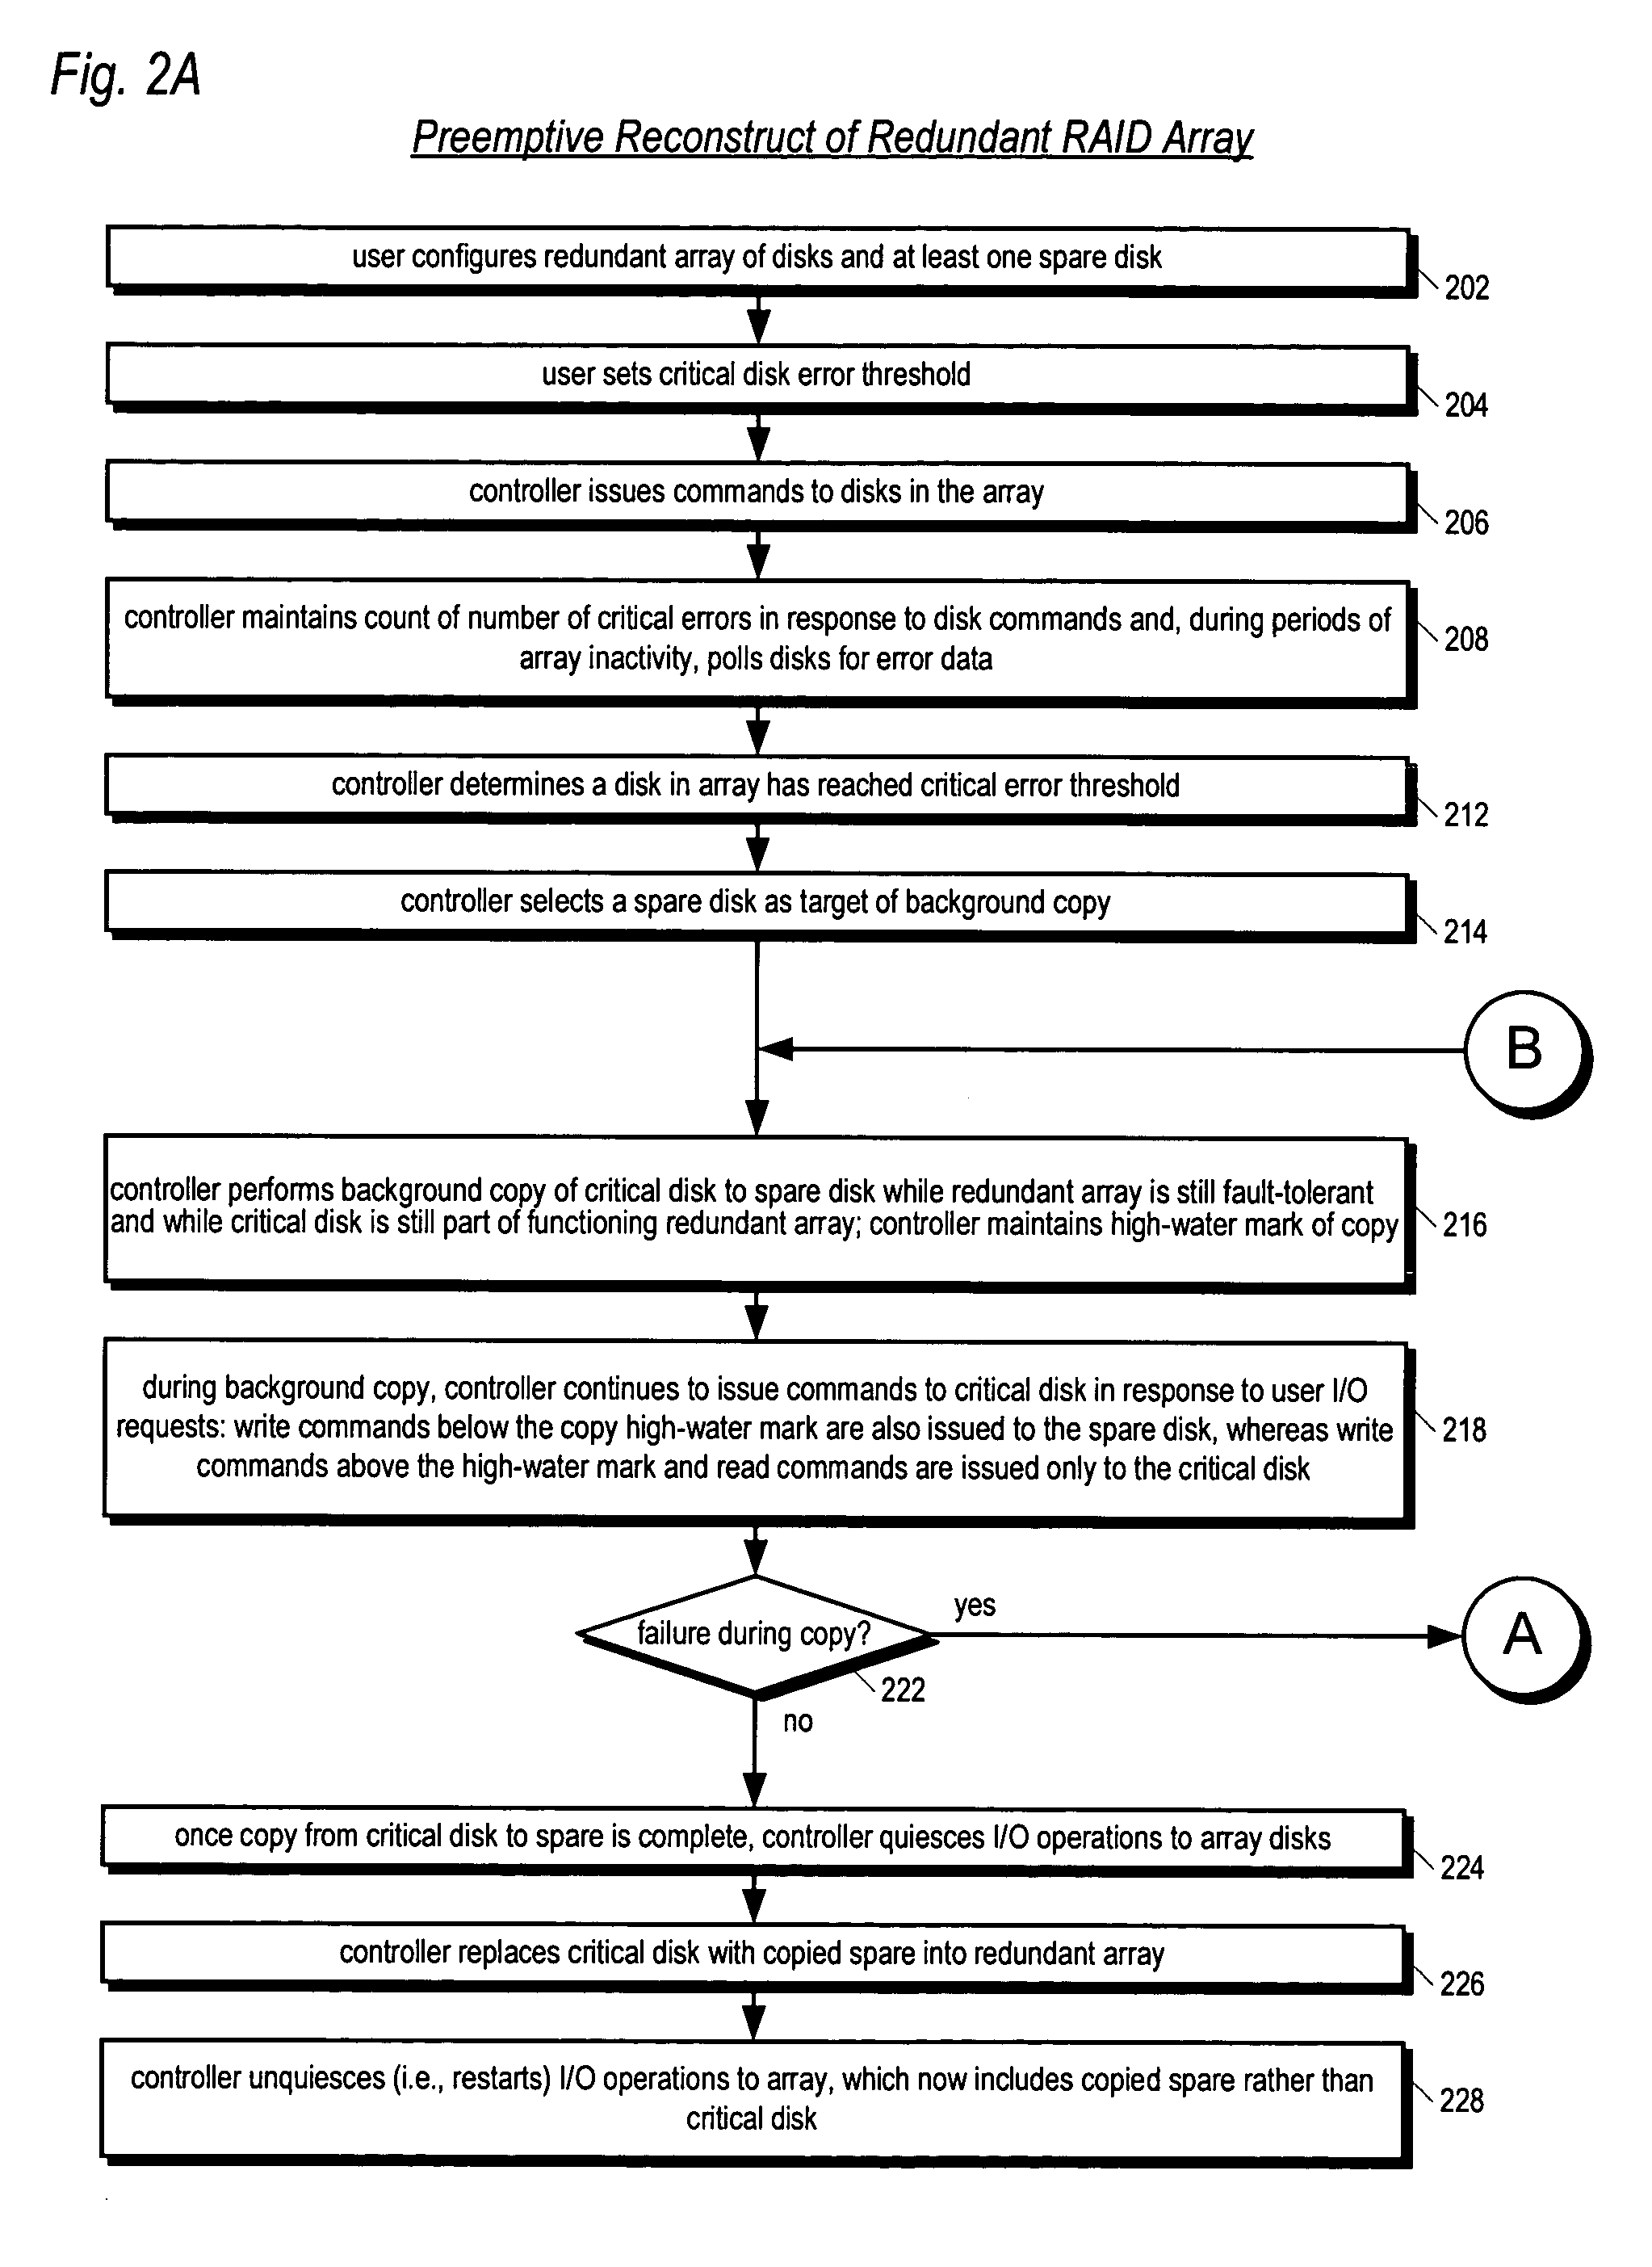 Apparatus and method for performing a preemptive reconstruct of a fault-tolerant RAID array